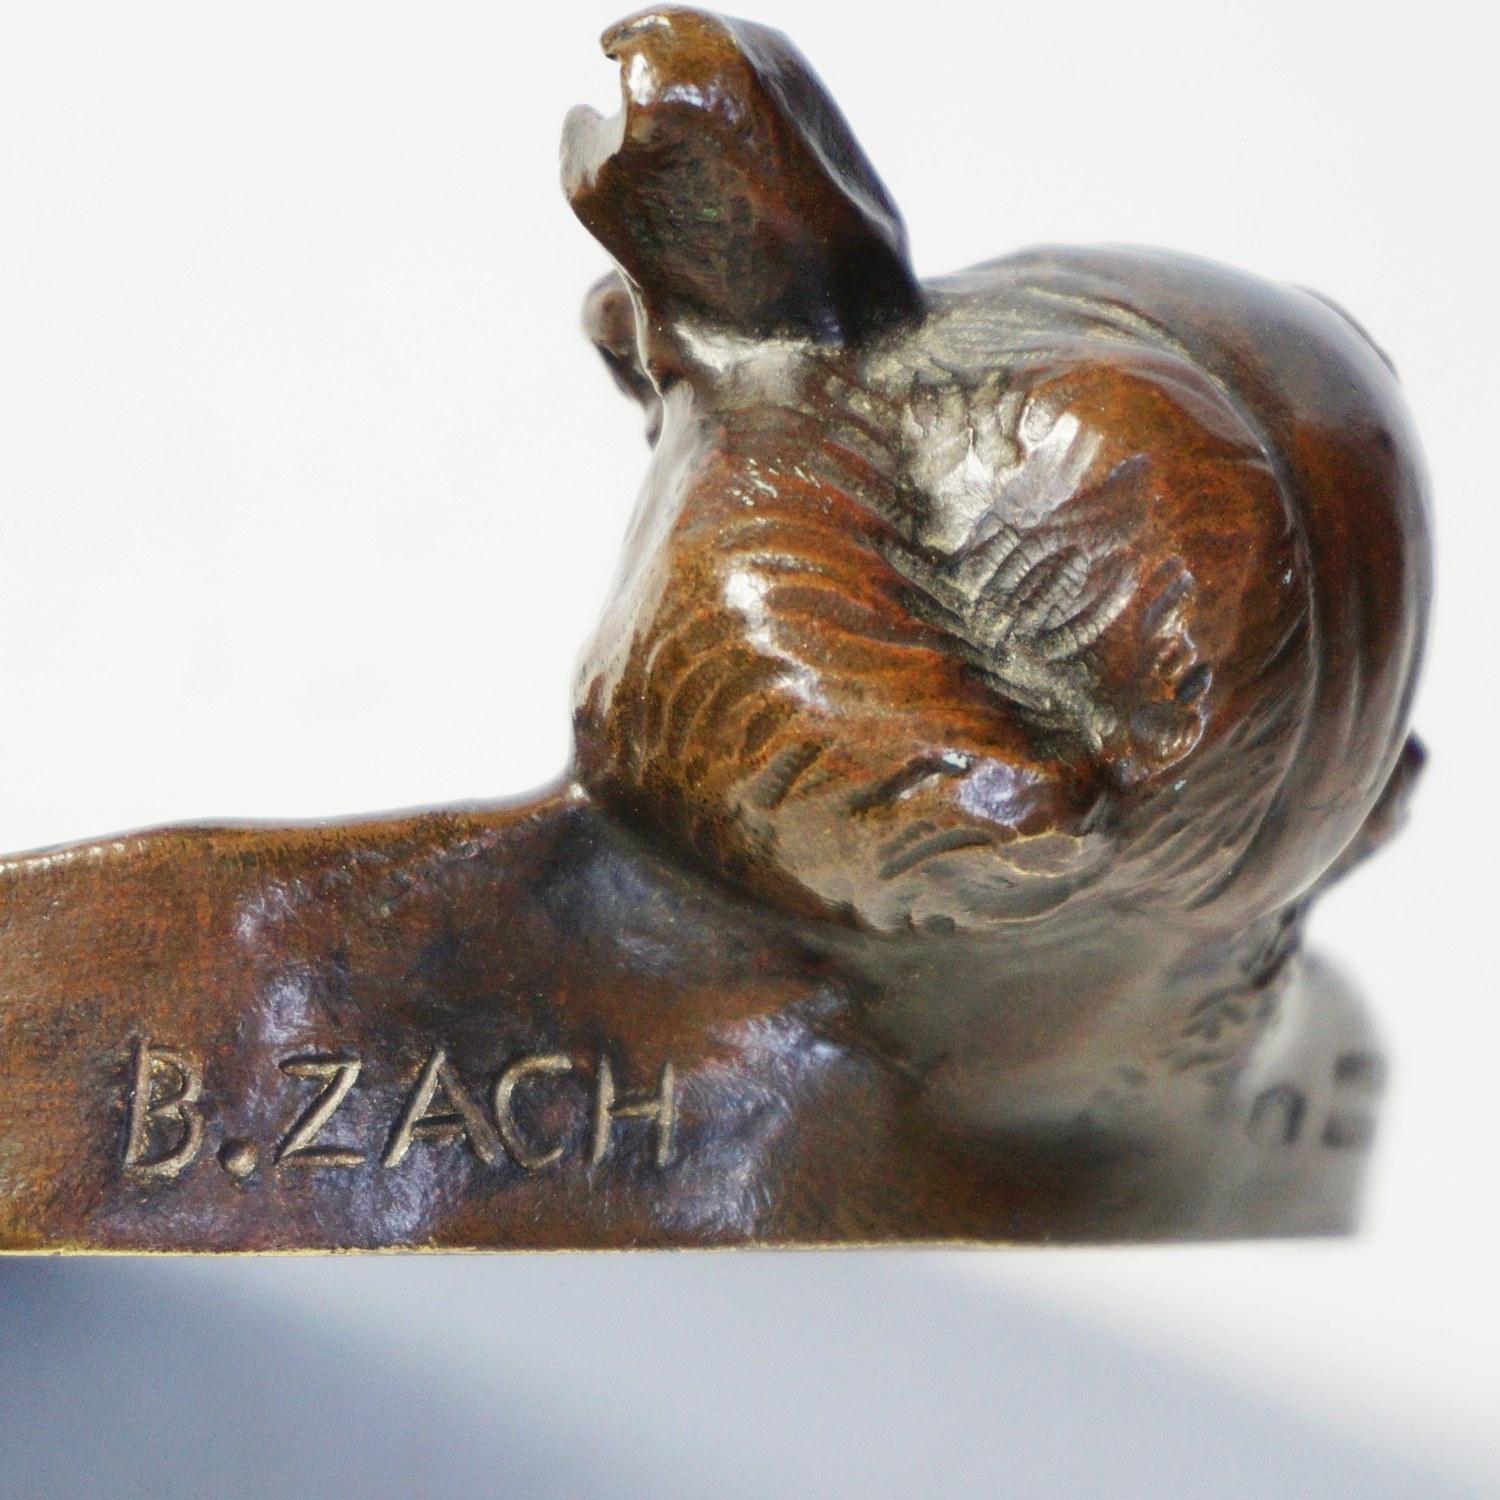 An Art Deco bronze pin dish with a ladies head looking outward. Signed 'B. Zach' and stamped 'Made in Austria' 

Artist: Bruno Zach (1891-1935)

Dimensions: W 14 cm, H 4.5 cm

Origin: Austrian 

Date: circa 1925

Item number: 902213.